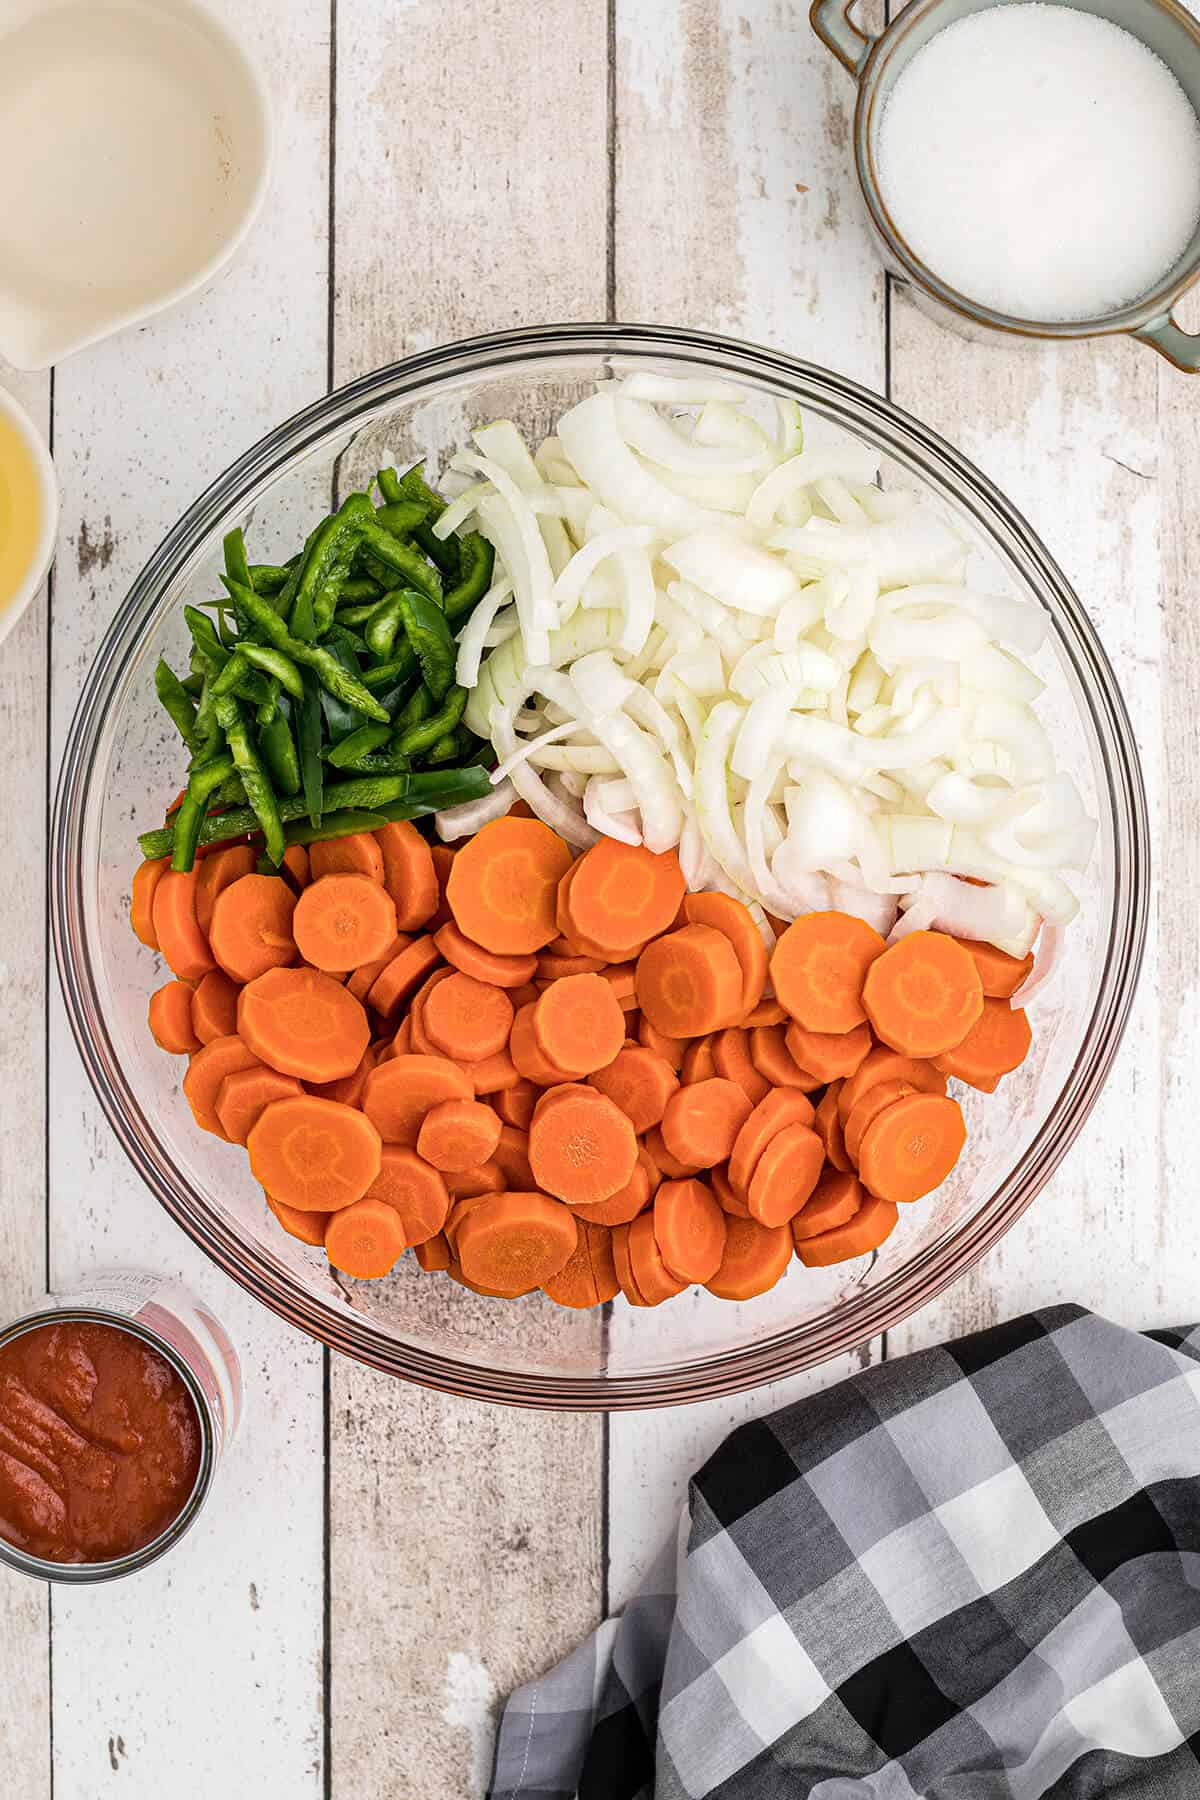 Carrots, onions, and peppers in a bowl.